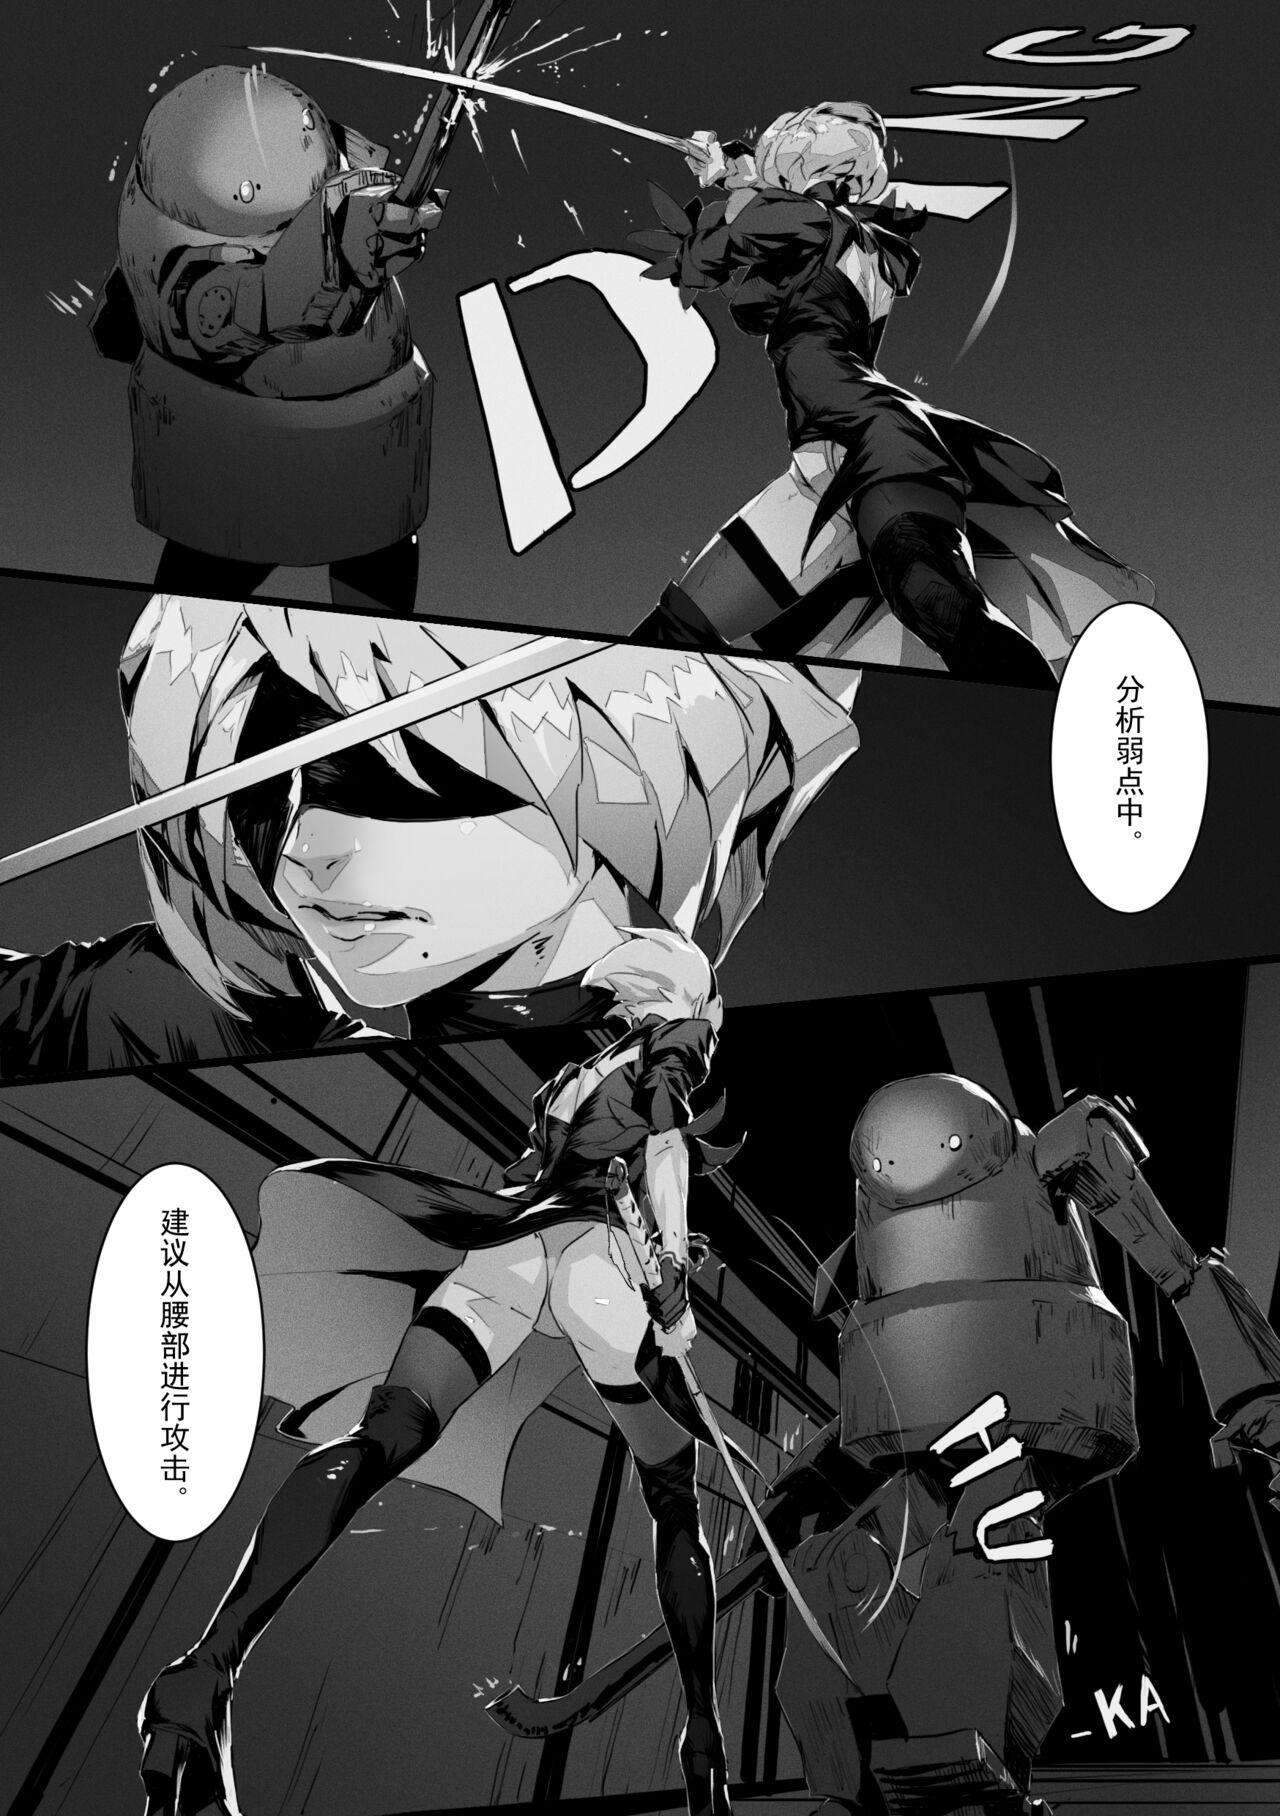  2B In Trouble Part 1-6 - Nier automata Real Amature Porn - Page 3